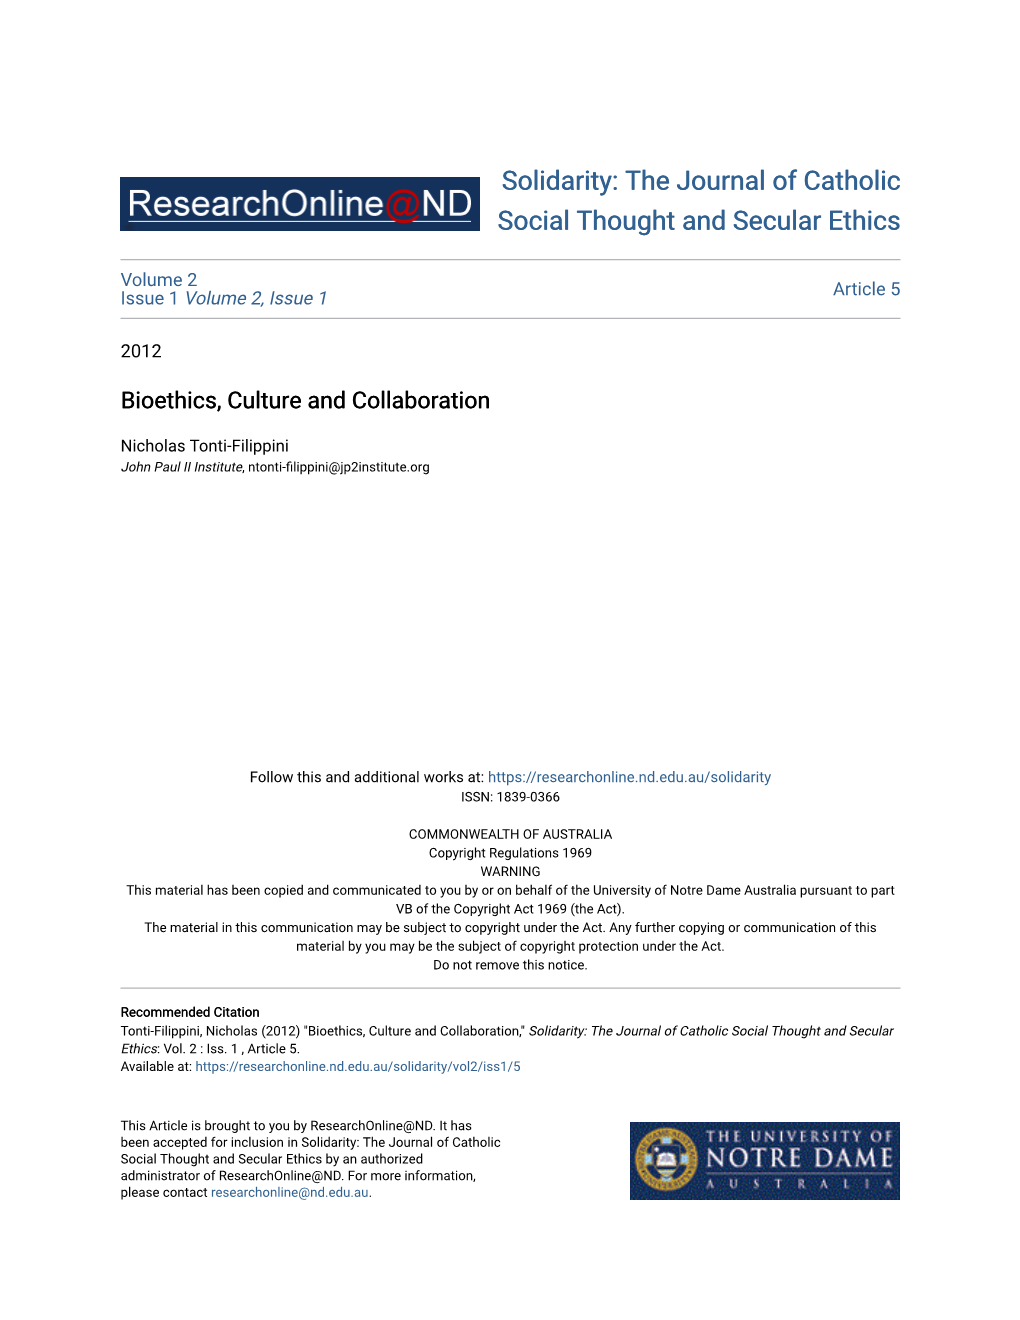 Bioethics, Culture and Collaboration